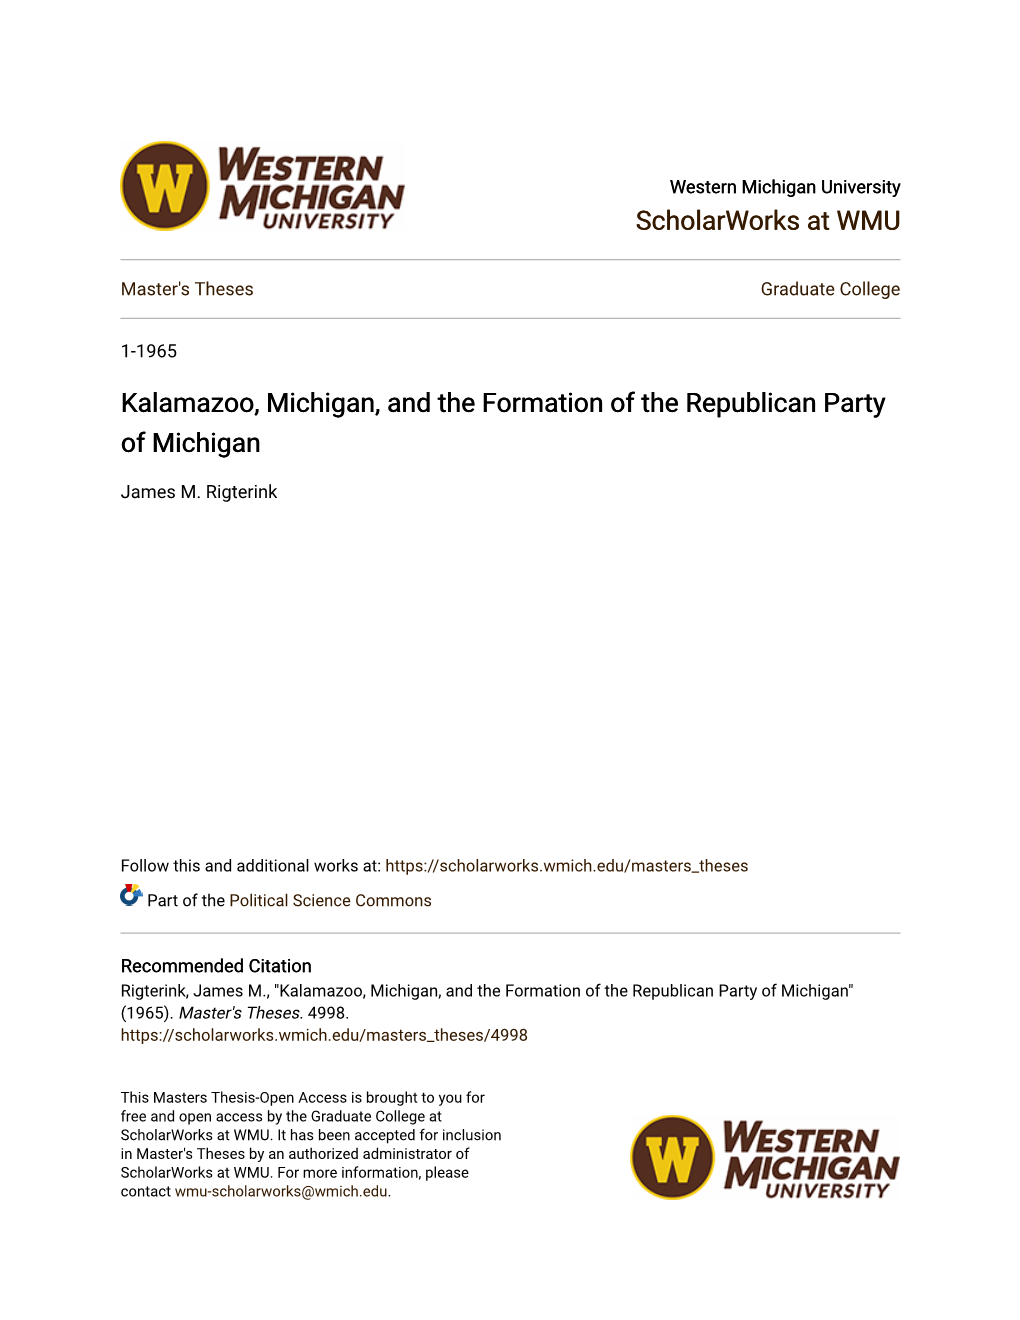 Kalamazoo, Michigan, and the Formation of the Republican Party of Michigan